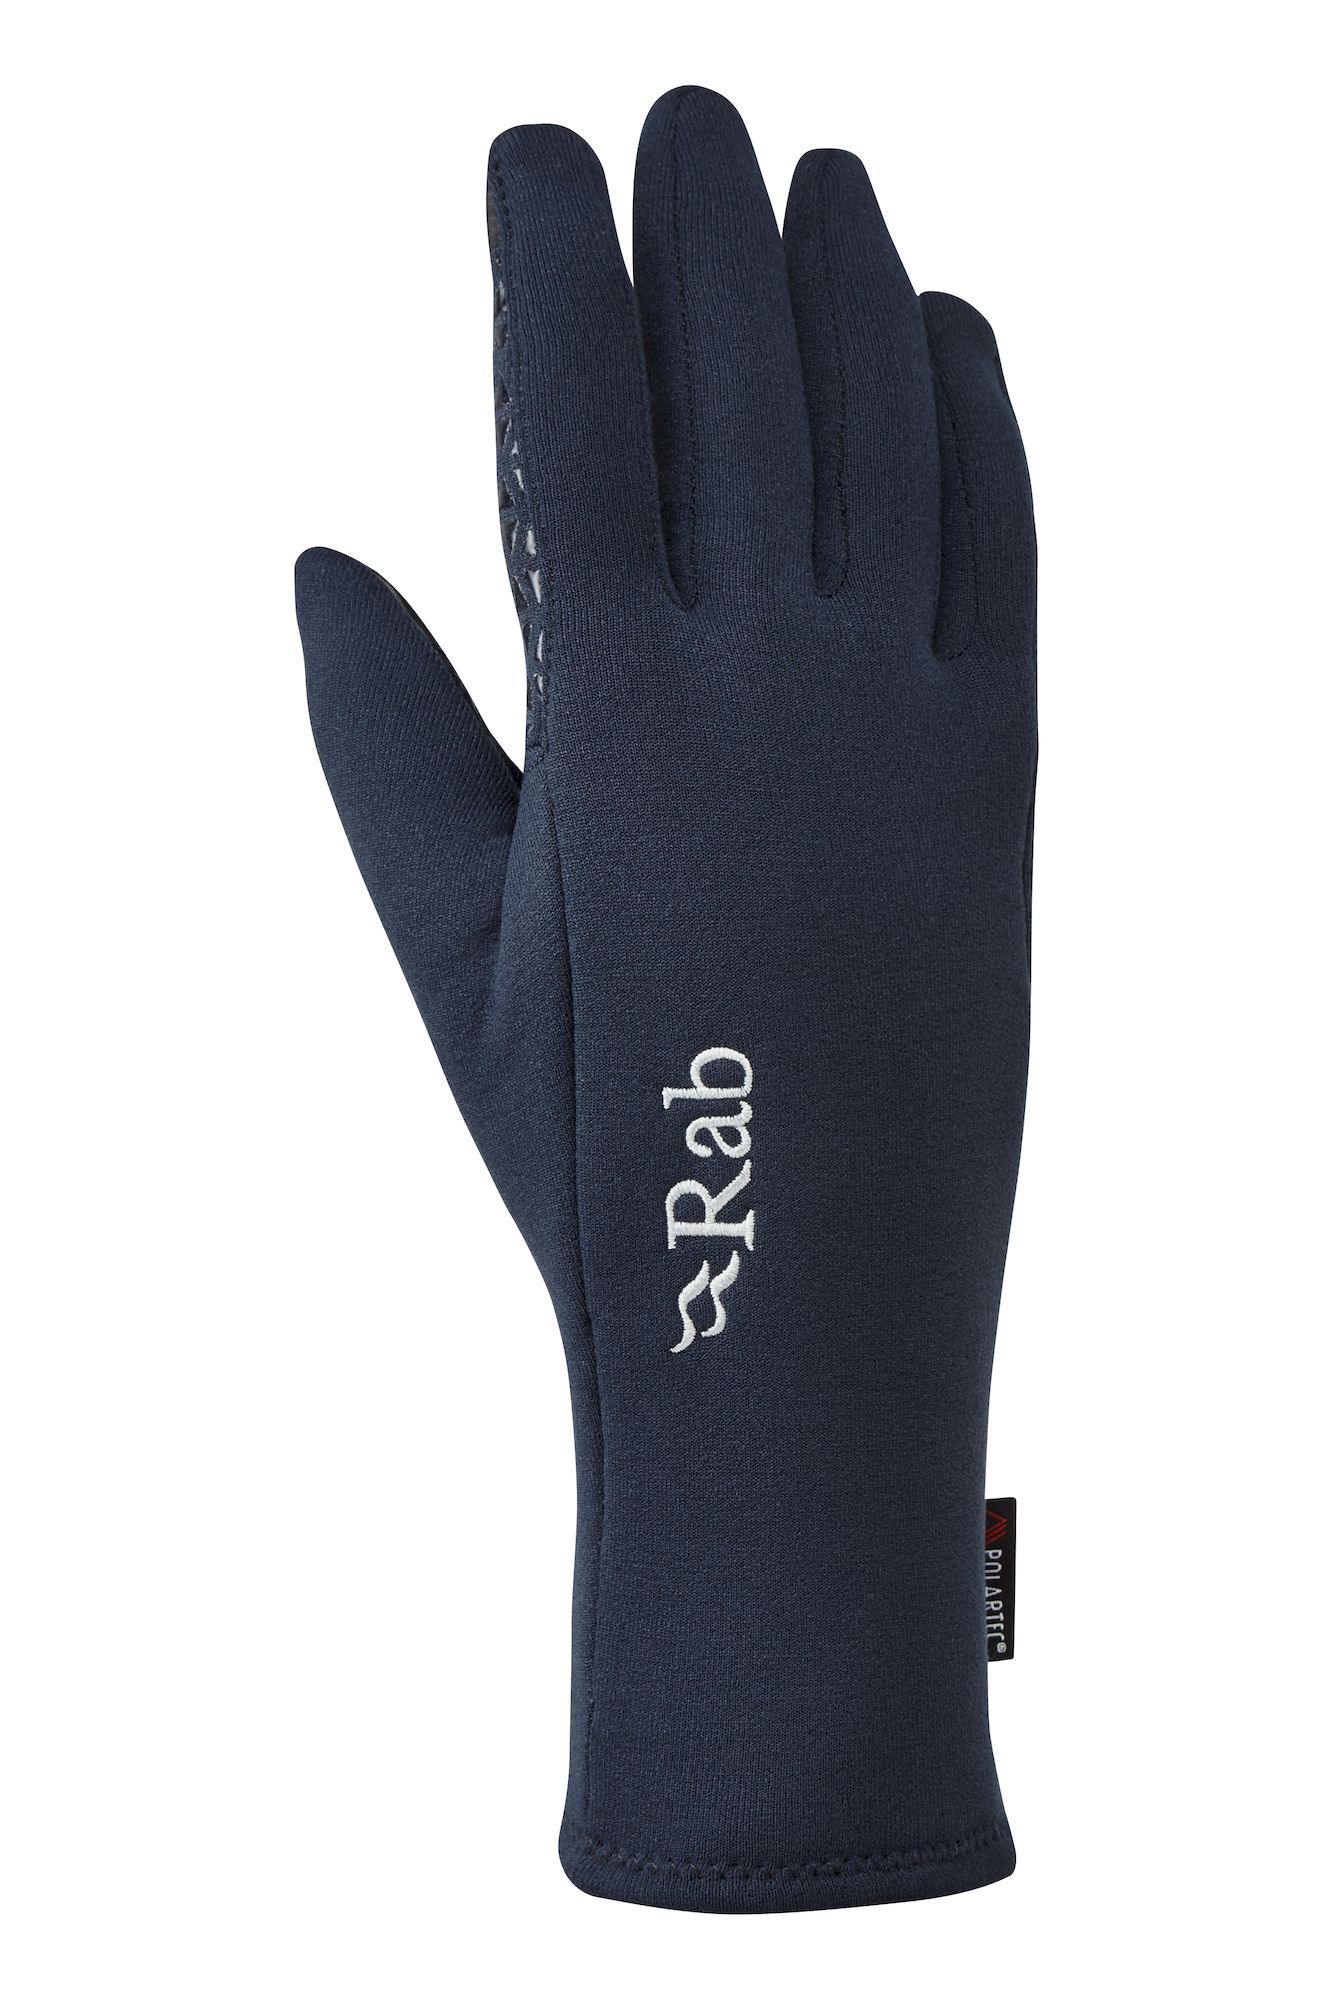 Rab Power Stretch Contact Grip Glove - Hiking gloves - Men's | Hardloop